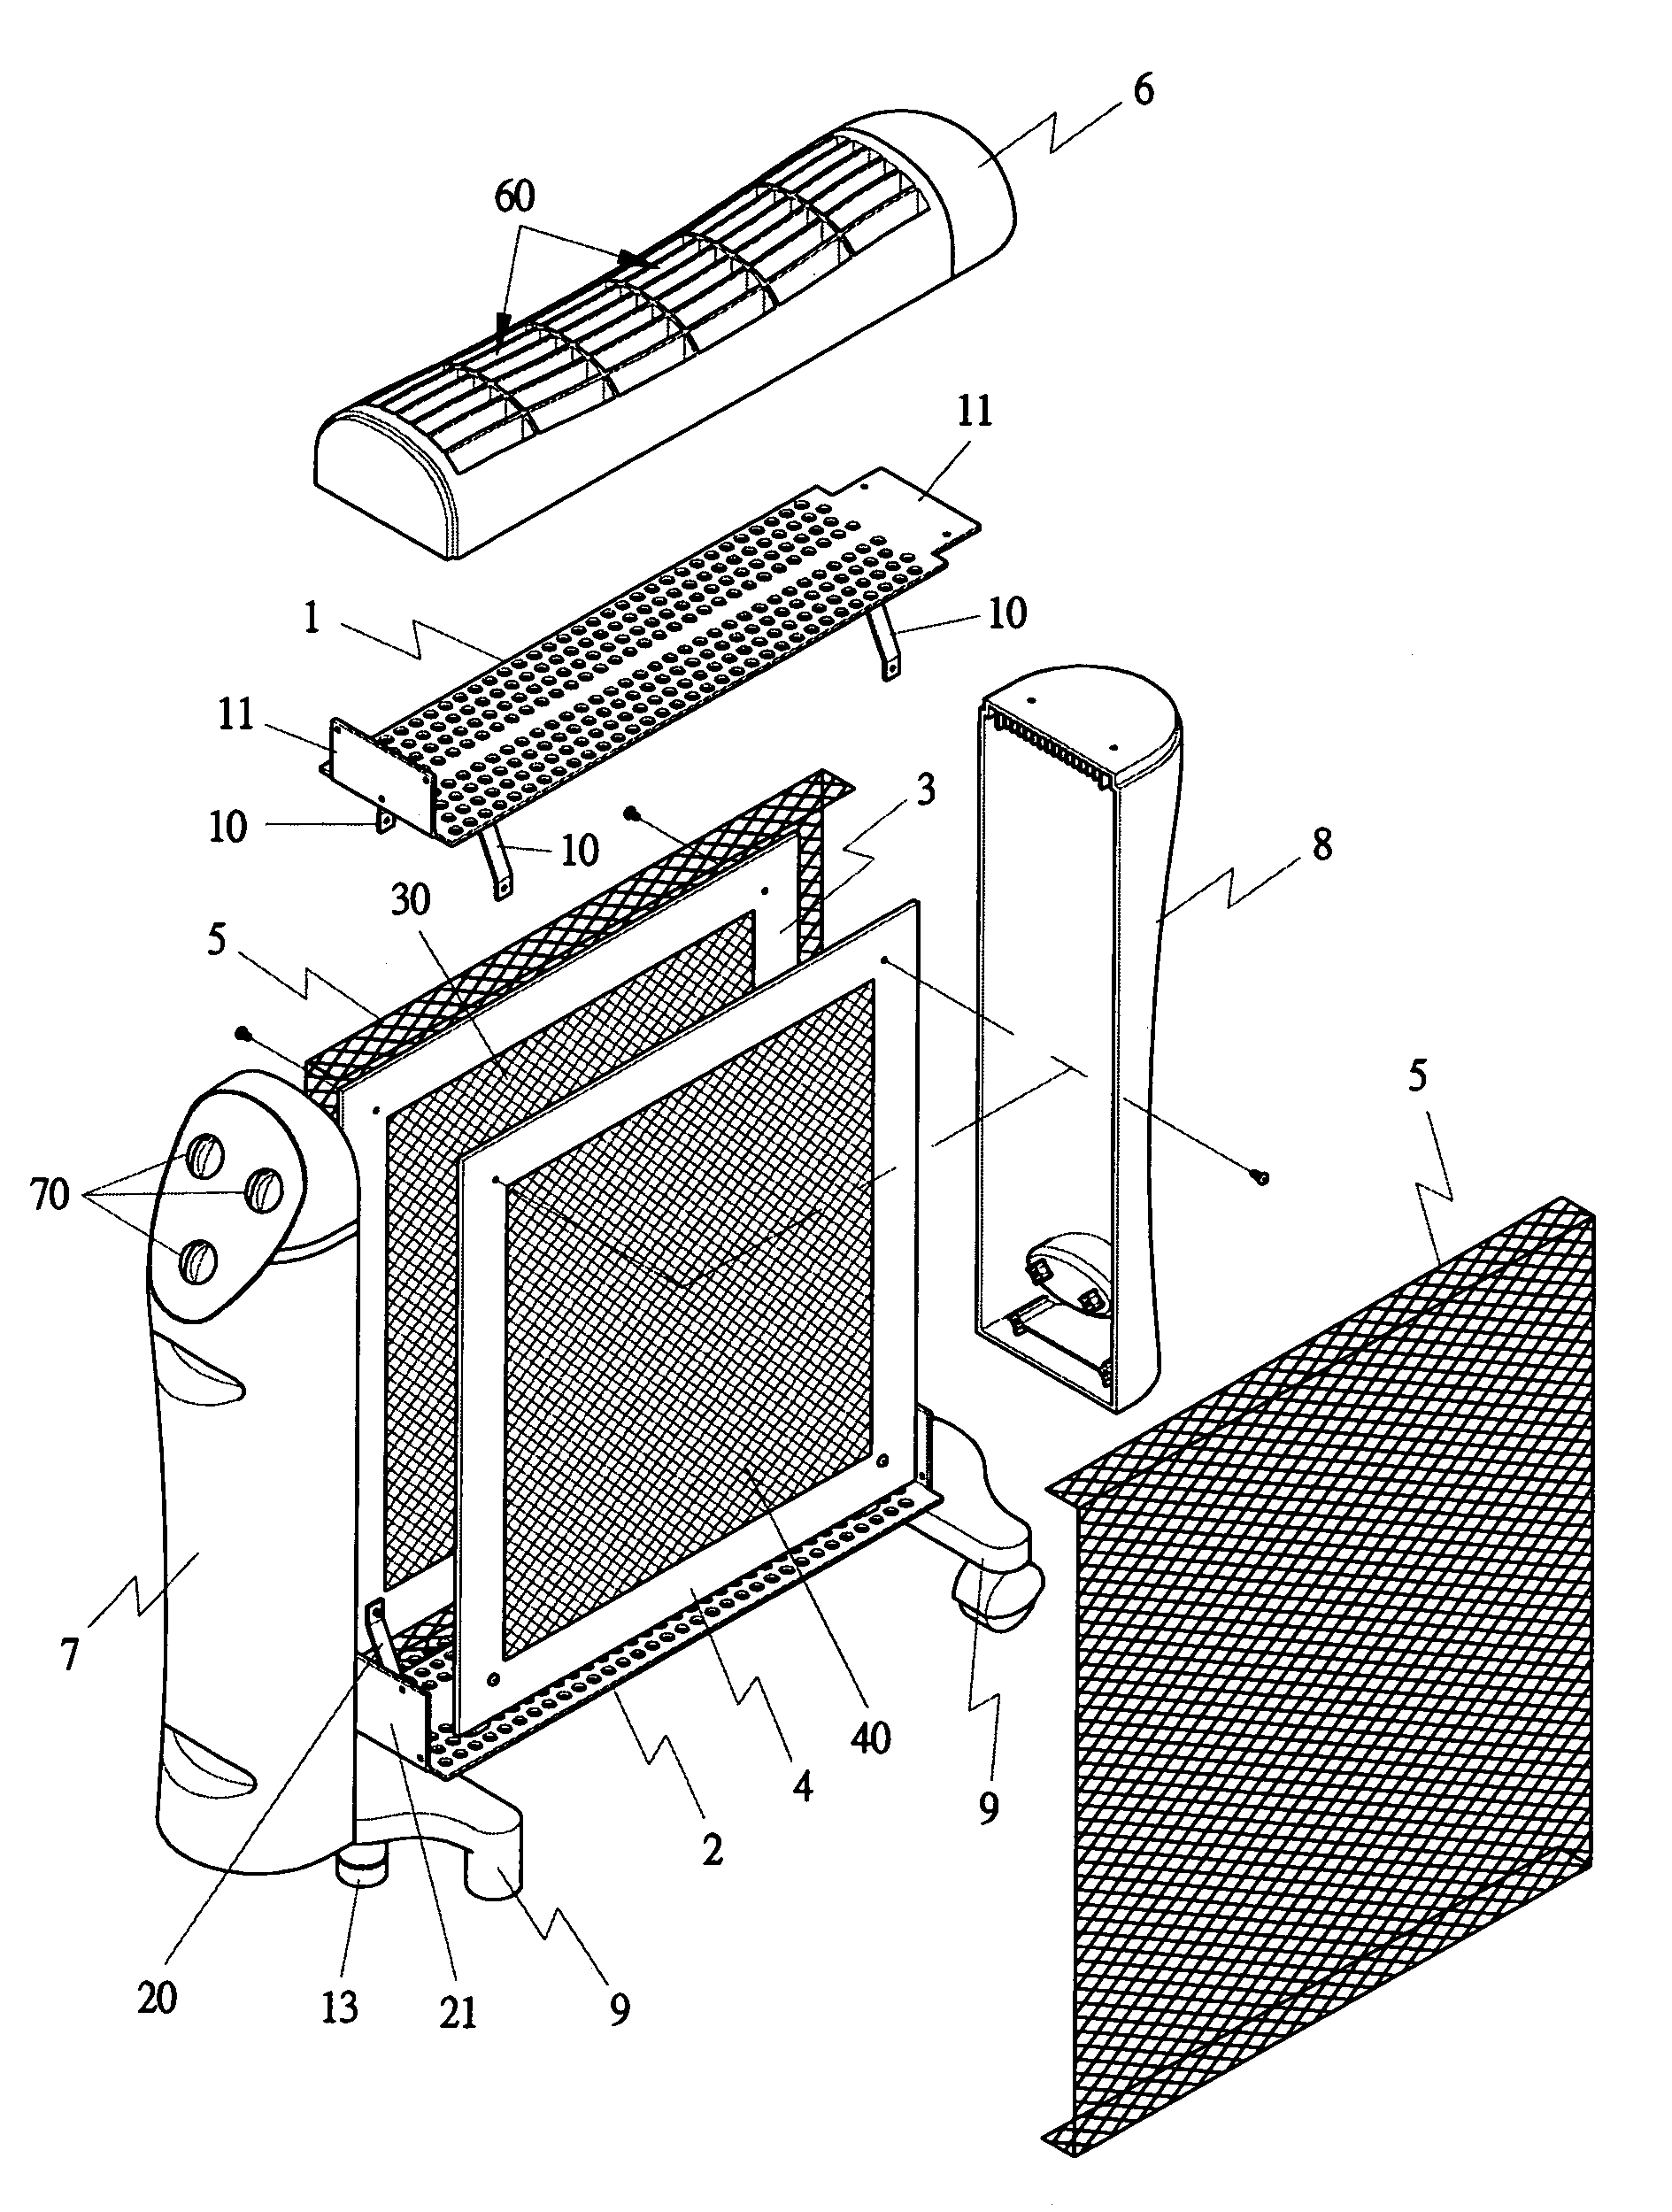 Convectional radial electric warmer